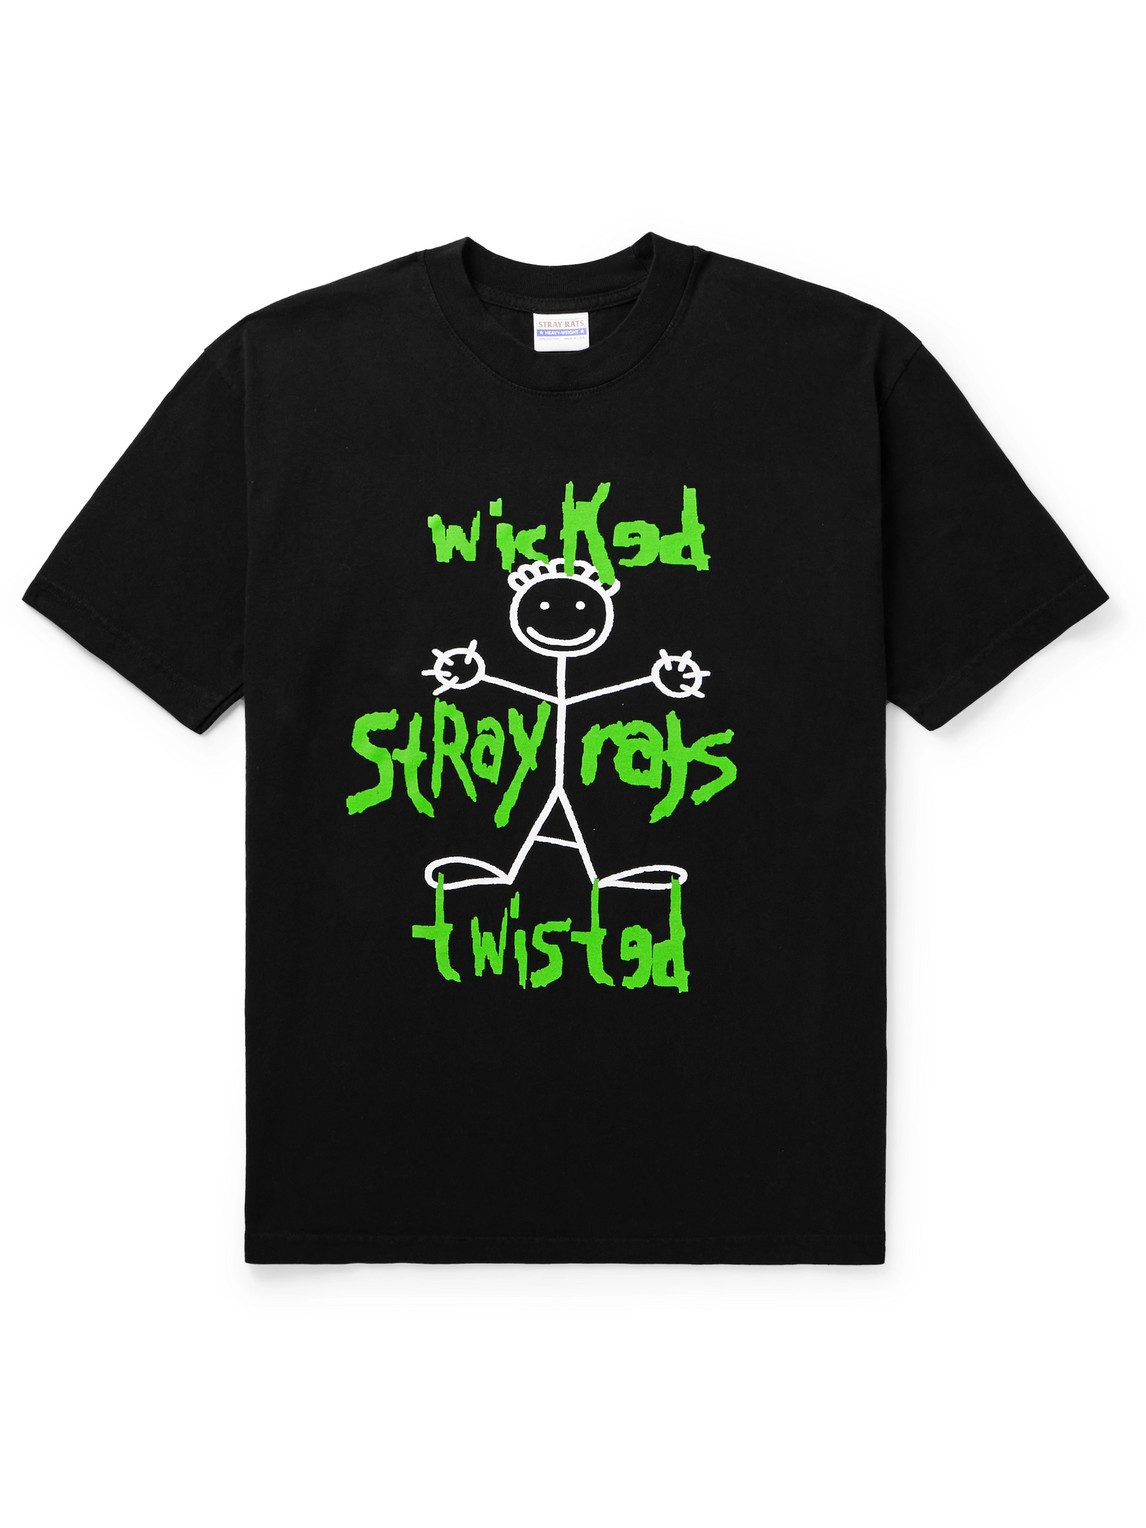 Wicked Twisted Printed Cotton-Jersey T-Shirt